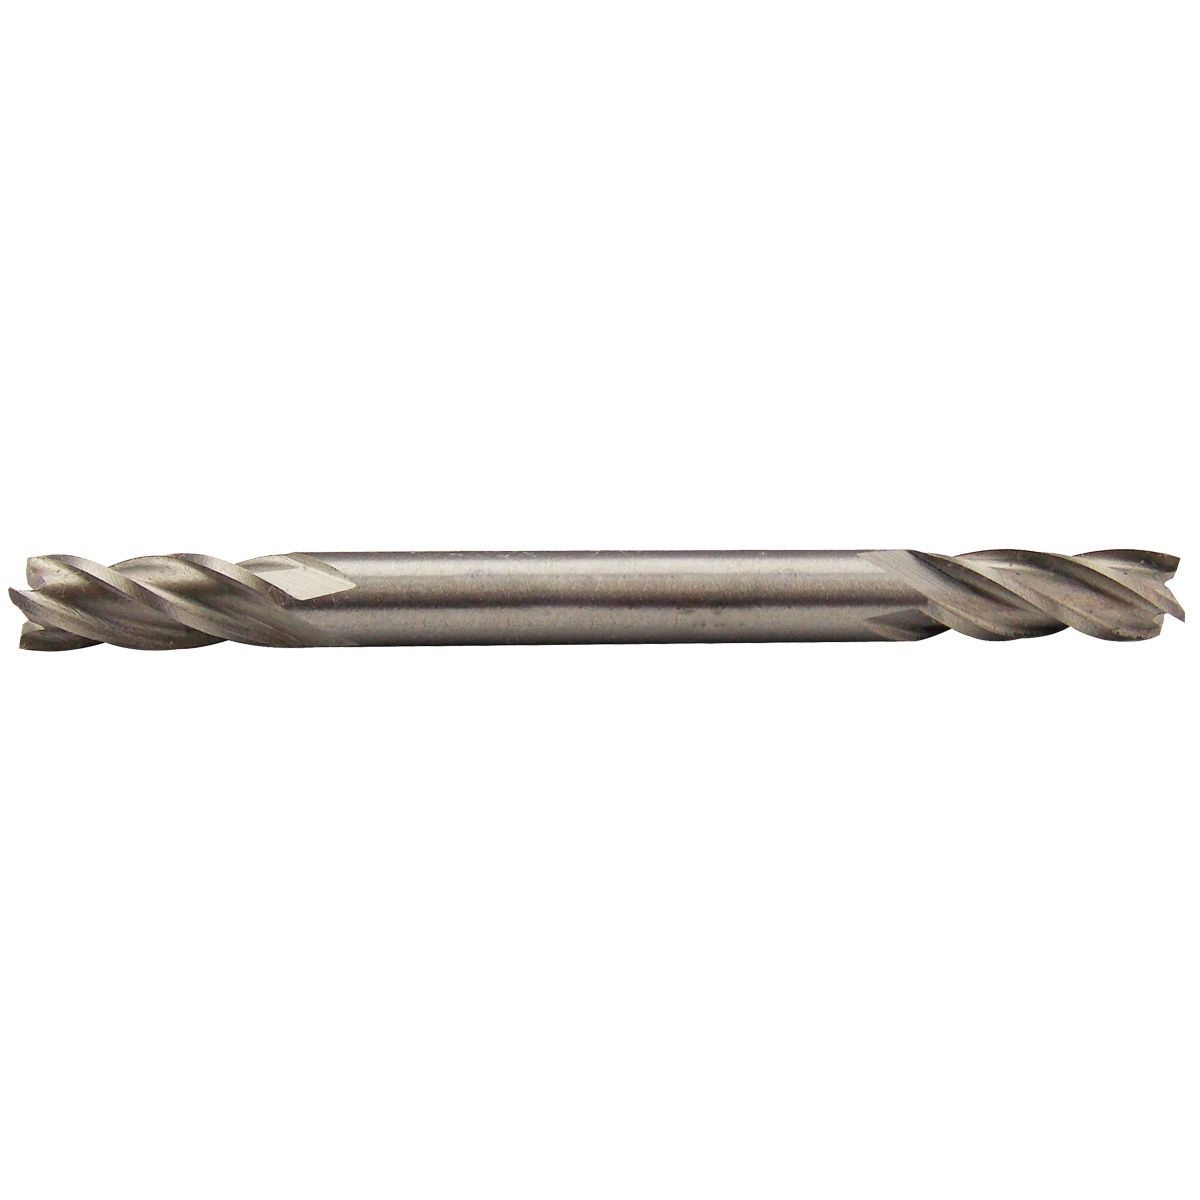 1/8" 4 FLUTE MINI HIGH SPEED STEEL DOUBLE END END MILL (5831-0026)